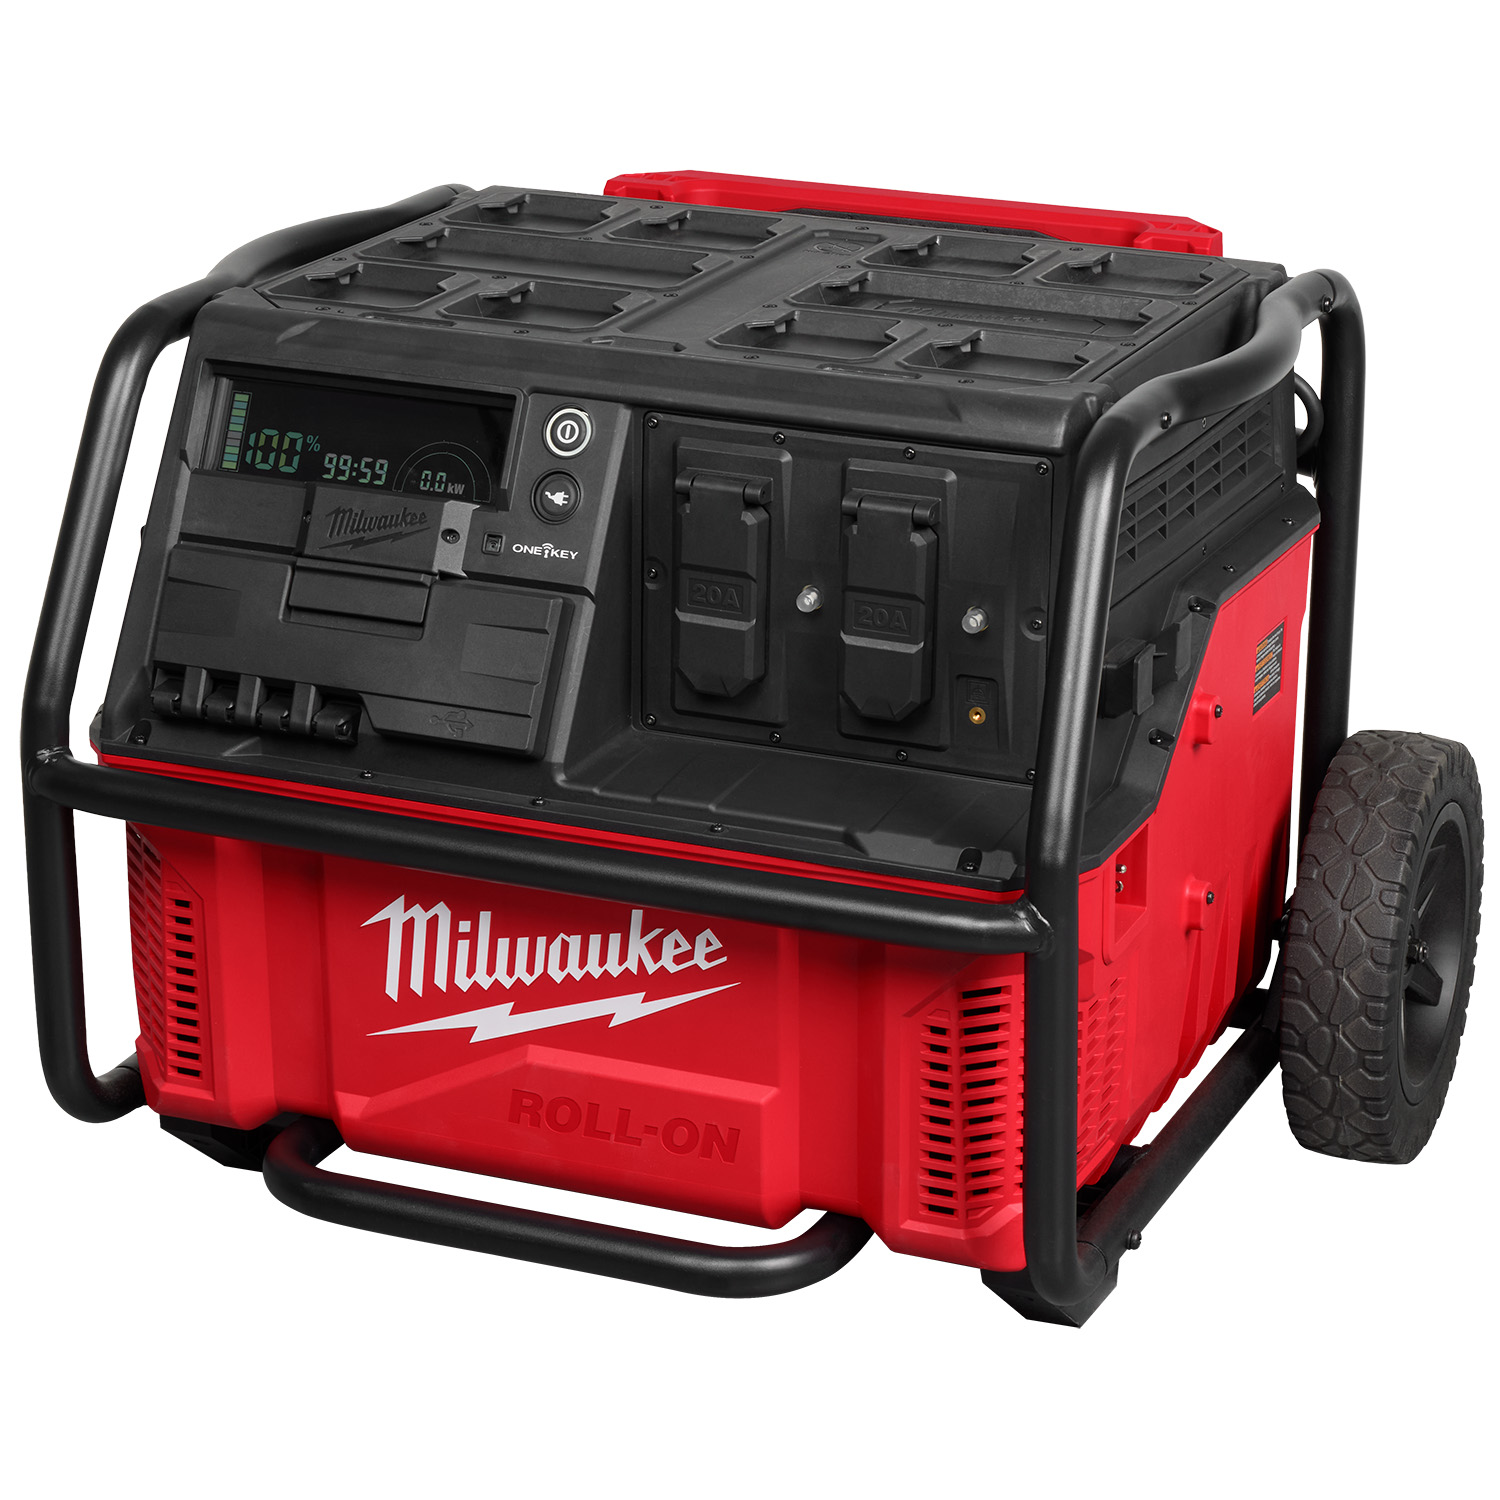 Milwaukee 3300R ROLL-ON 7200W/3600W 2.5kWh Power Supply from Columbia Safety